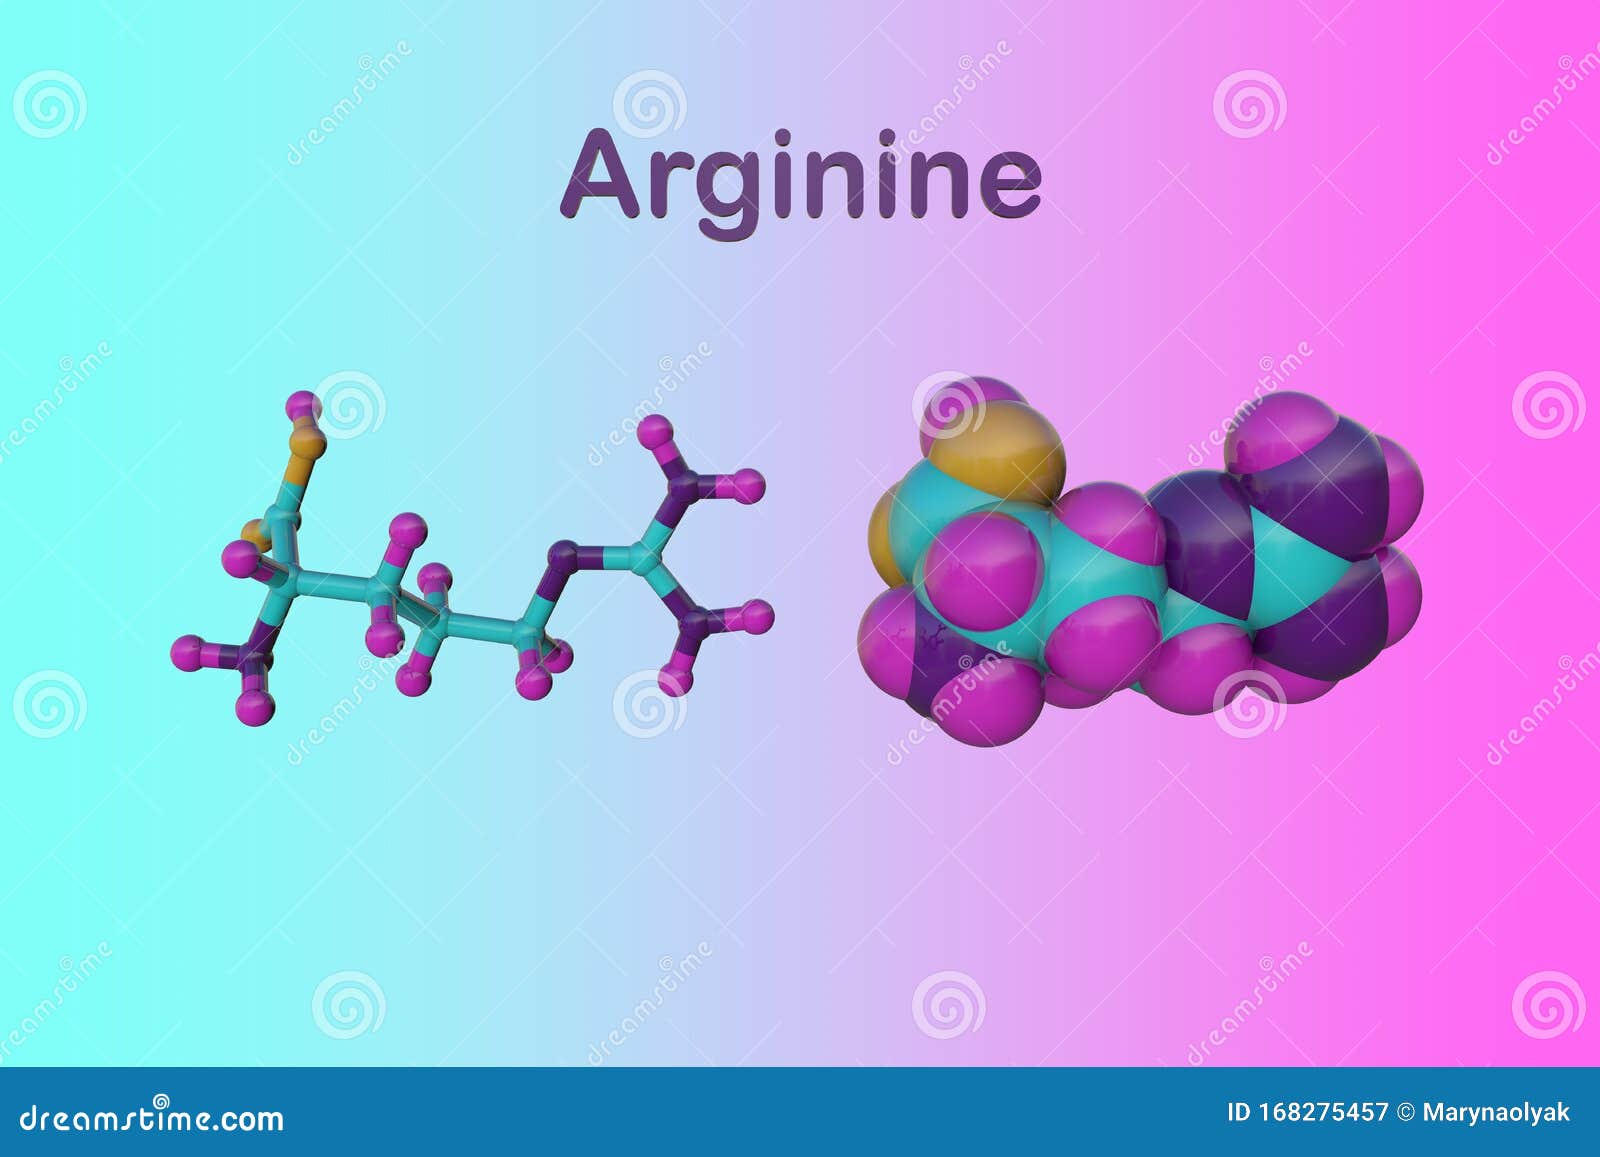 molecular structure of arginine, an essential amino acid used in the biosynthesis of proteins. medical background